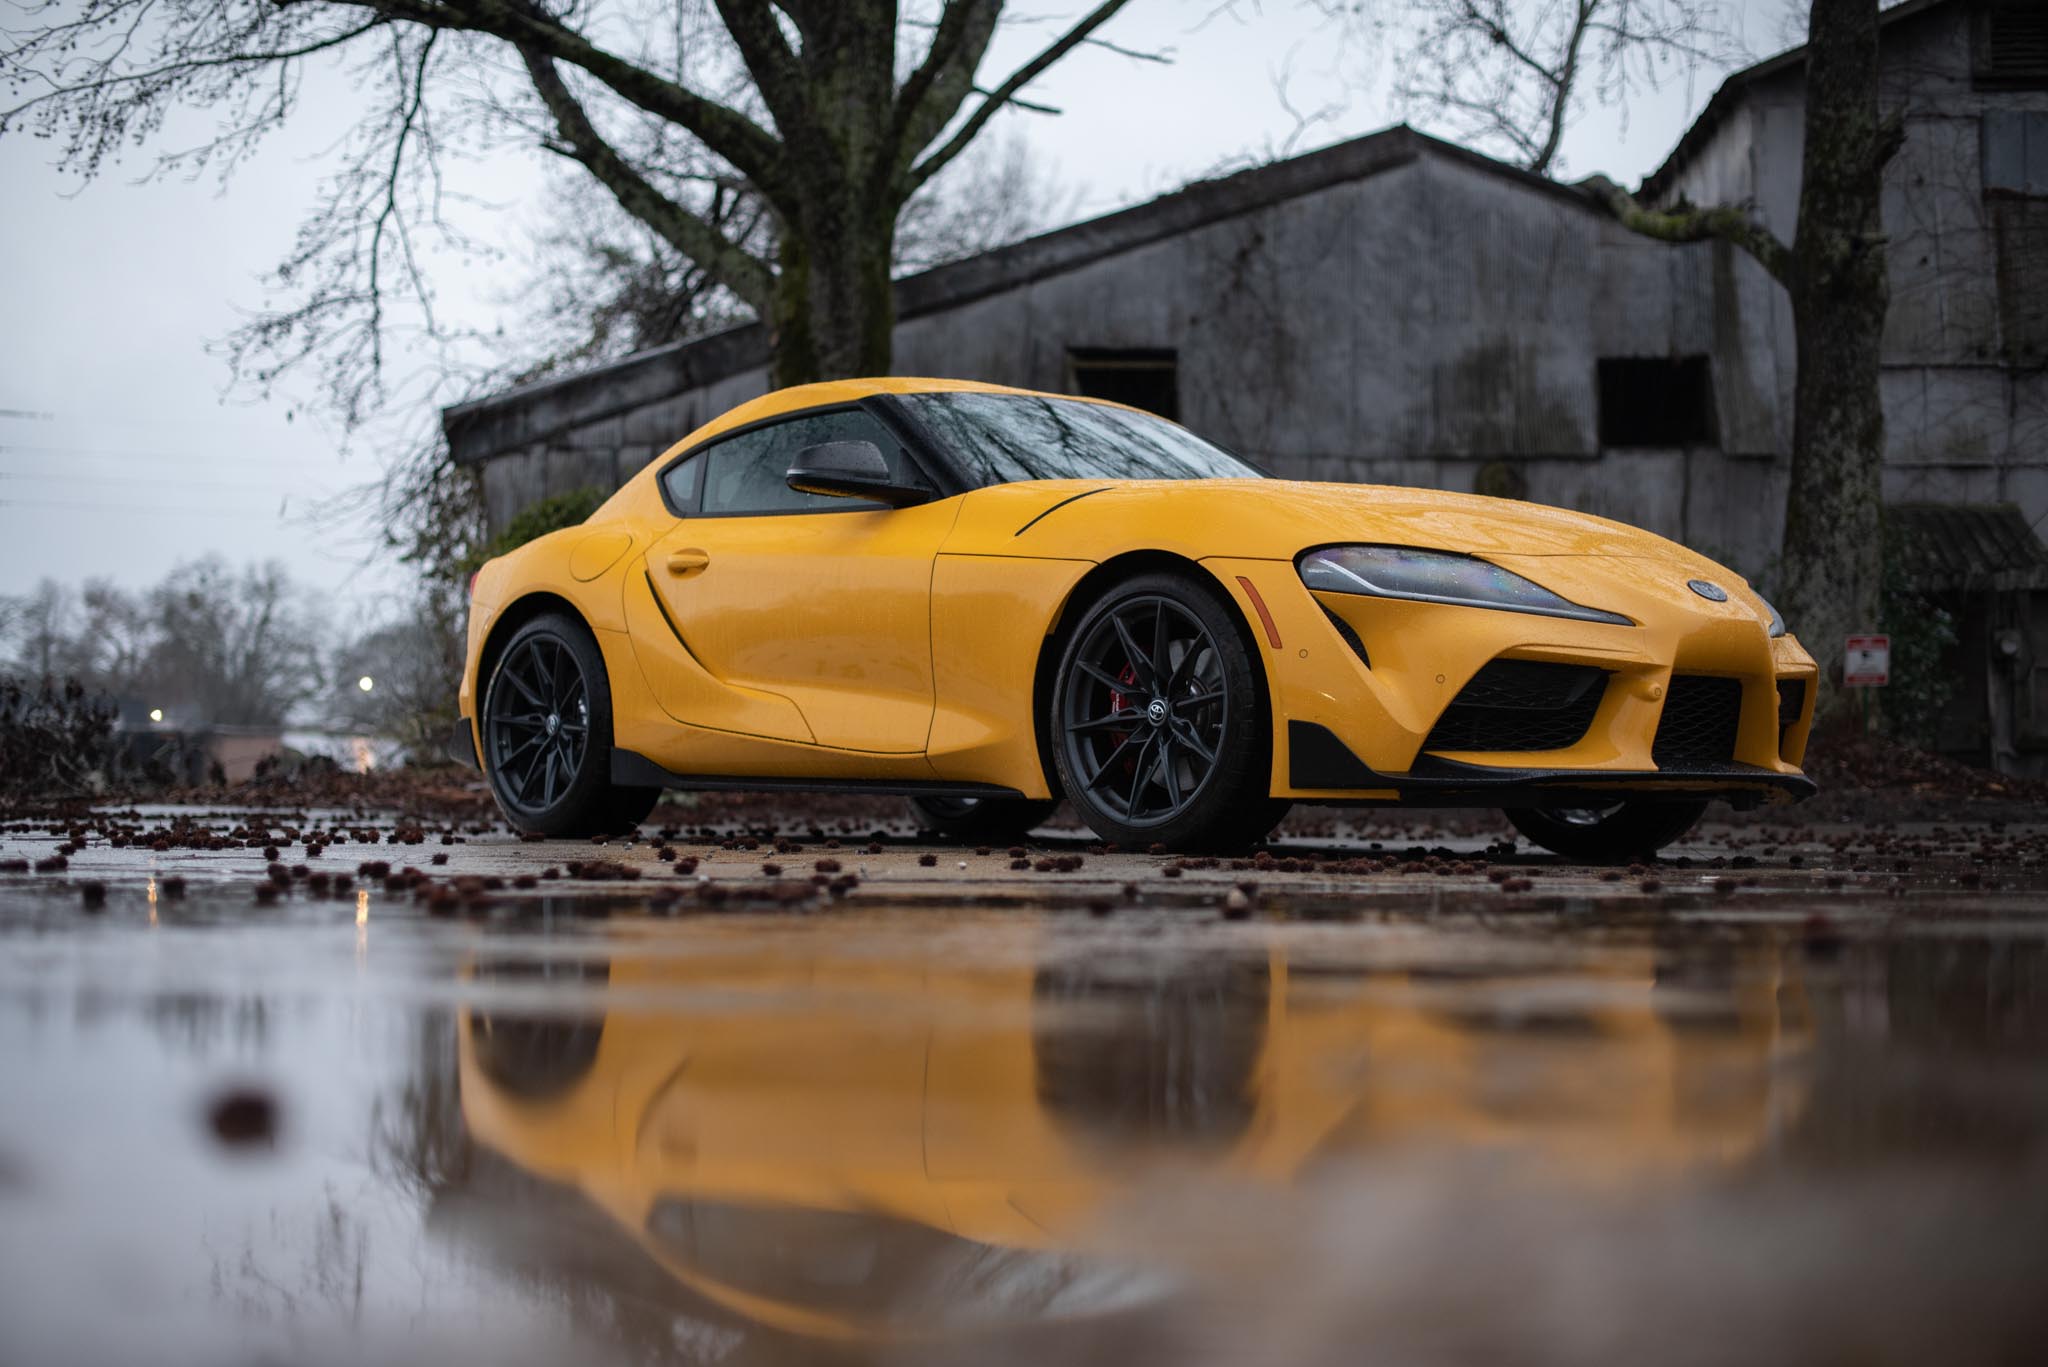 Toyota Supra now comes with a manual transmission - Motoring World